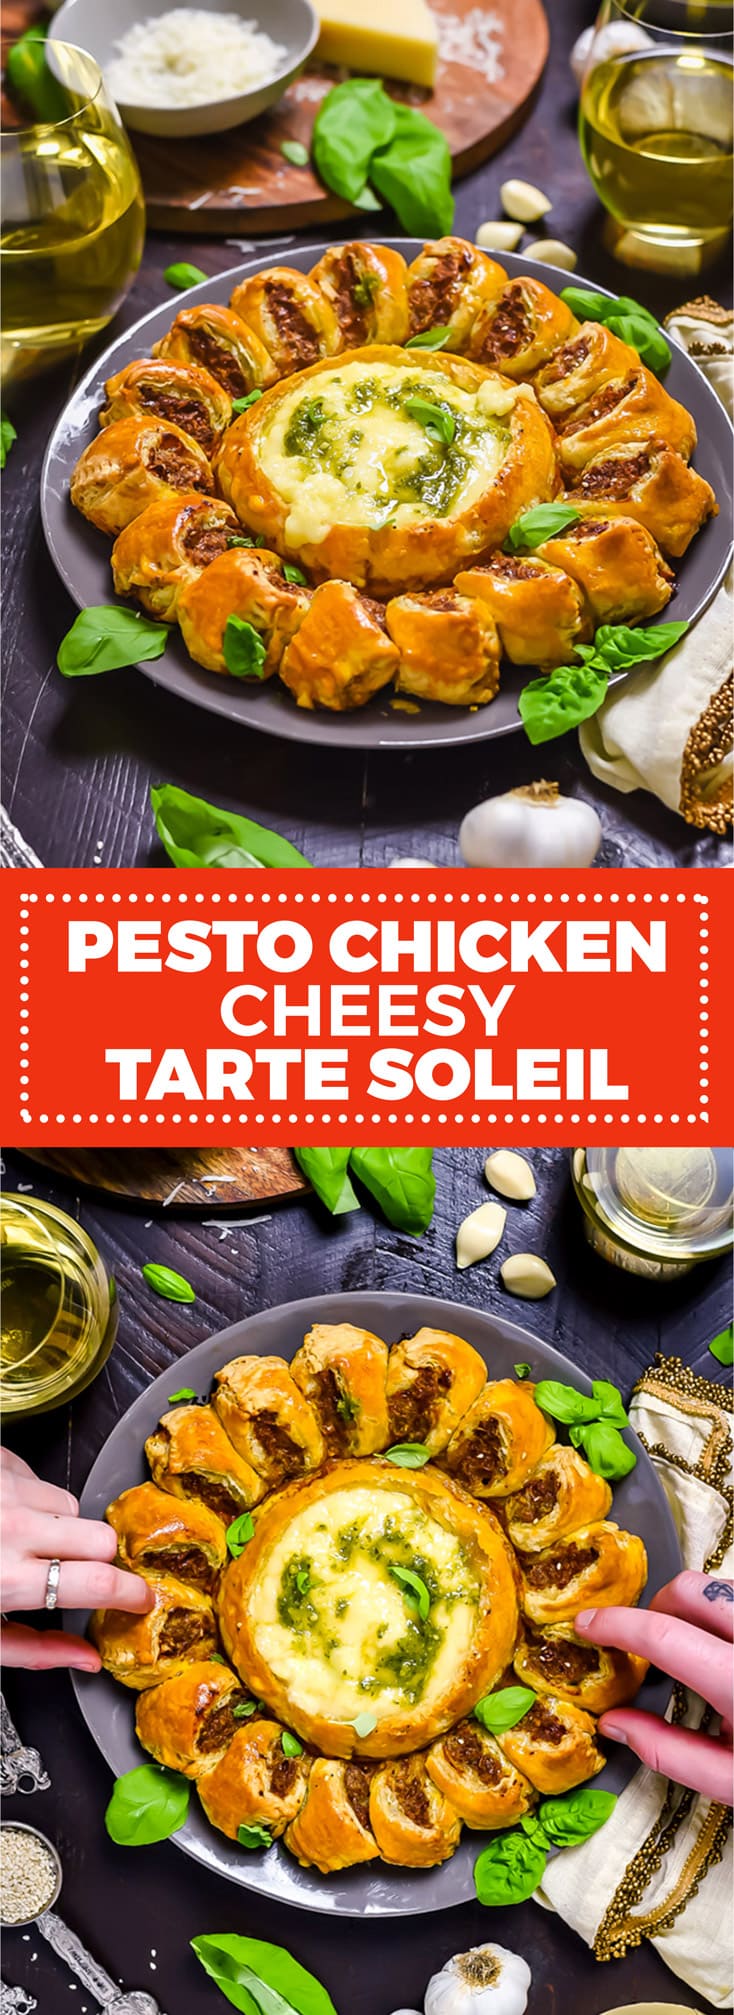 Pesto Chicken Cheesy Tarte Soleil. Baked brie or camembert and pesto-loaded ground chicken are baked in puff pastry to create this pull-apart party appetizer. | hostthetoast.com